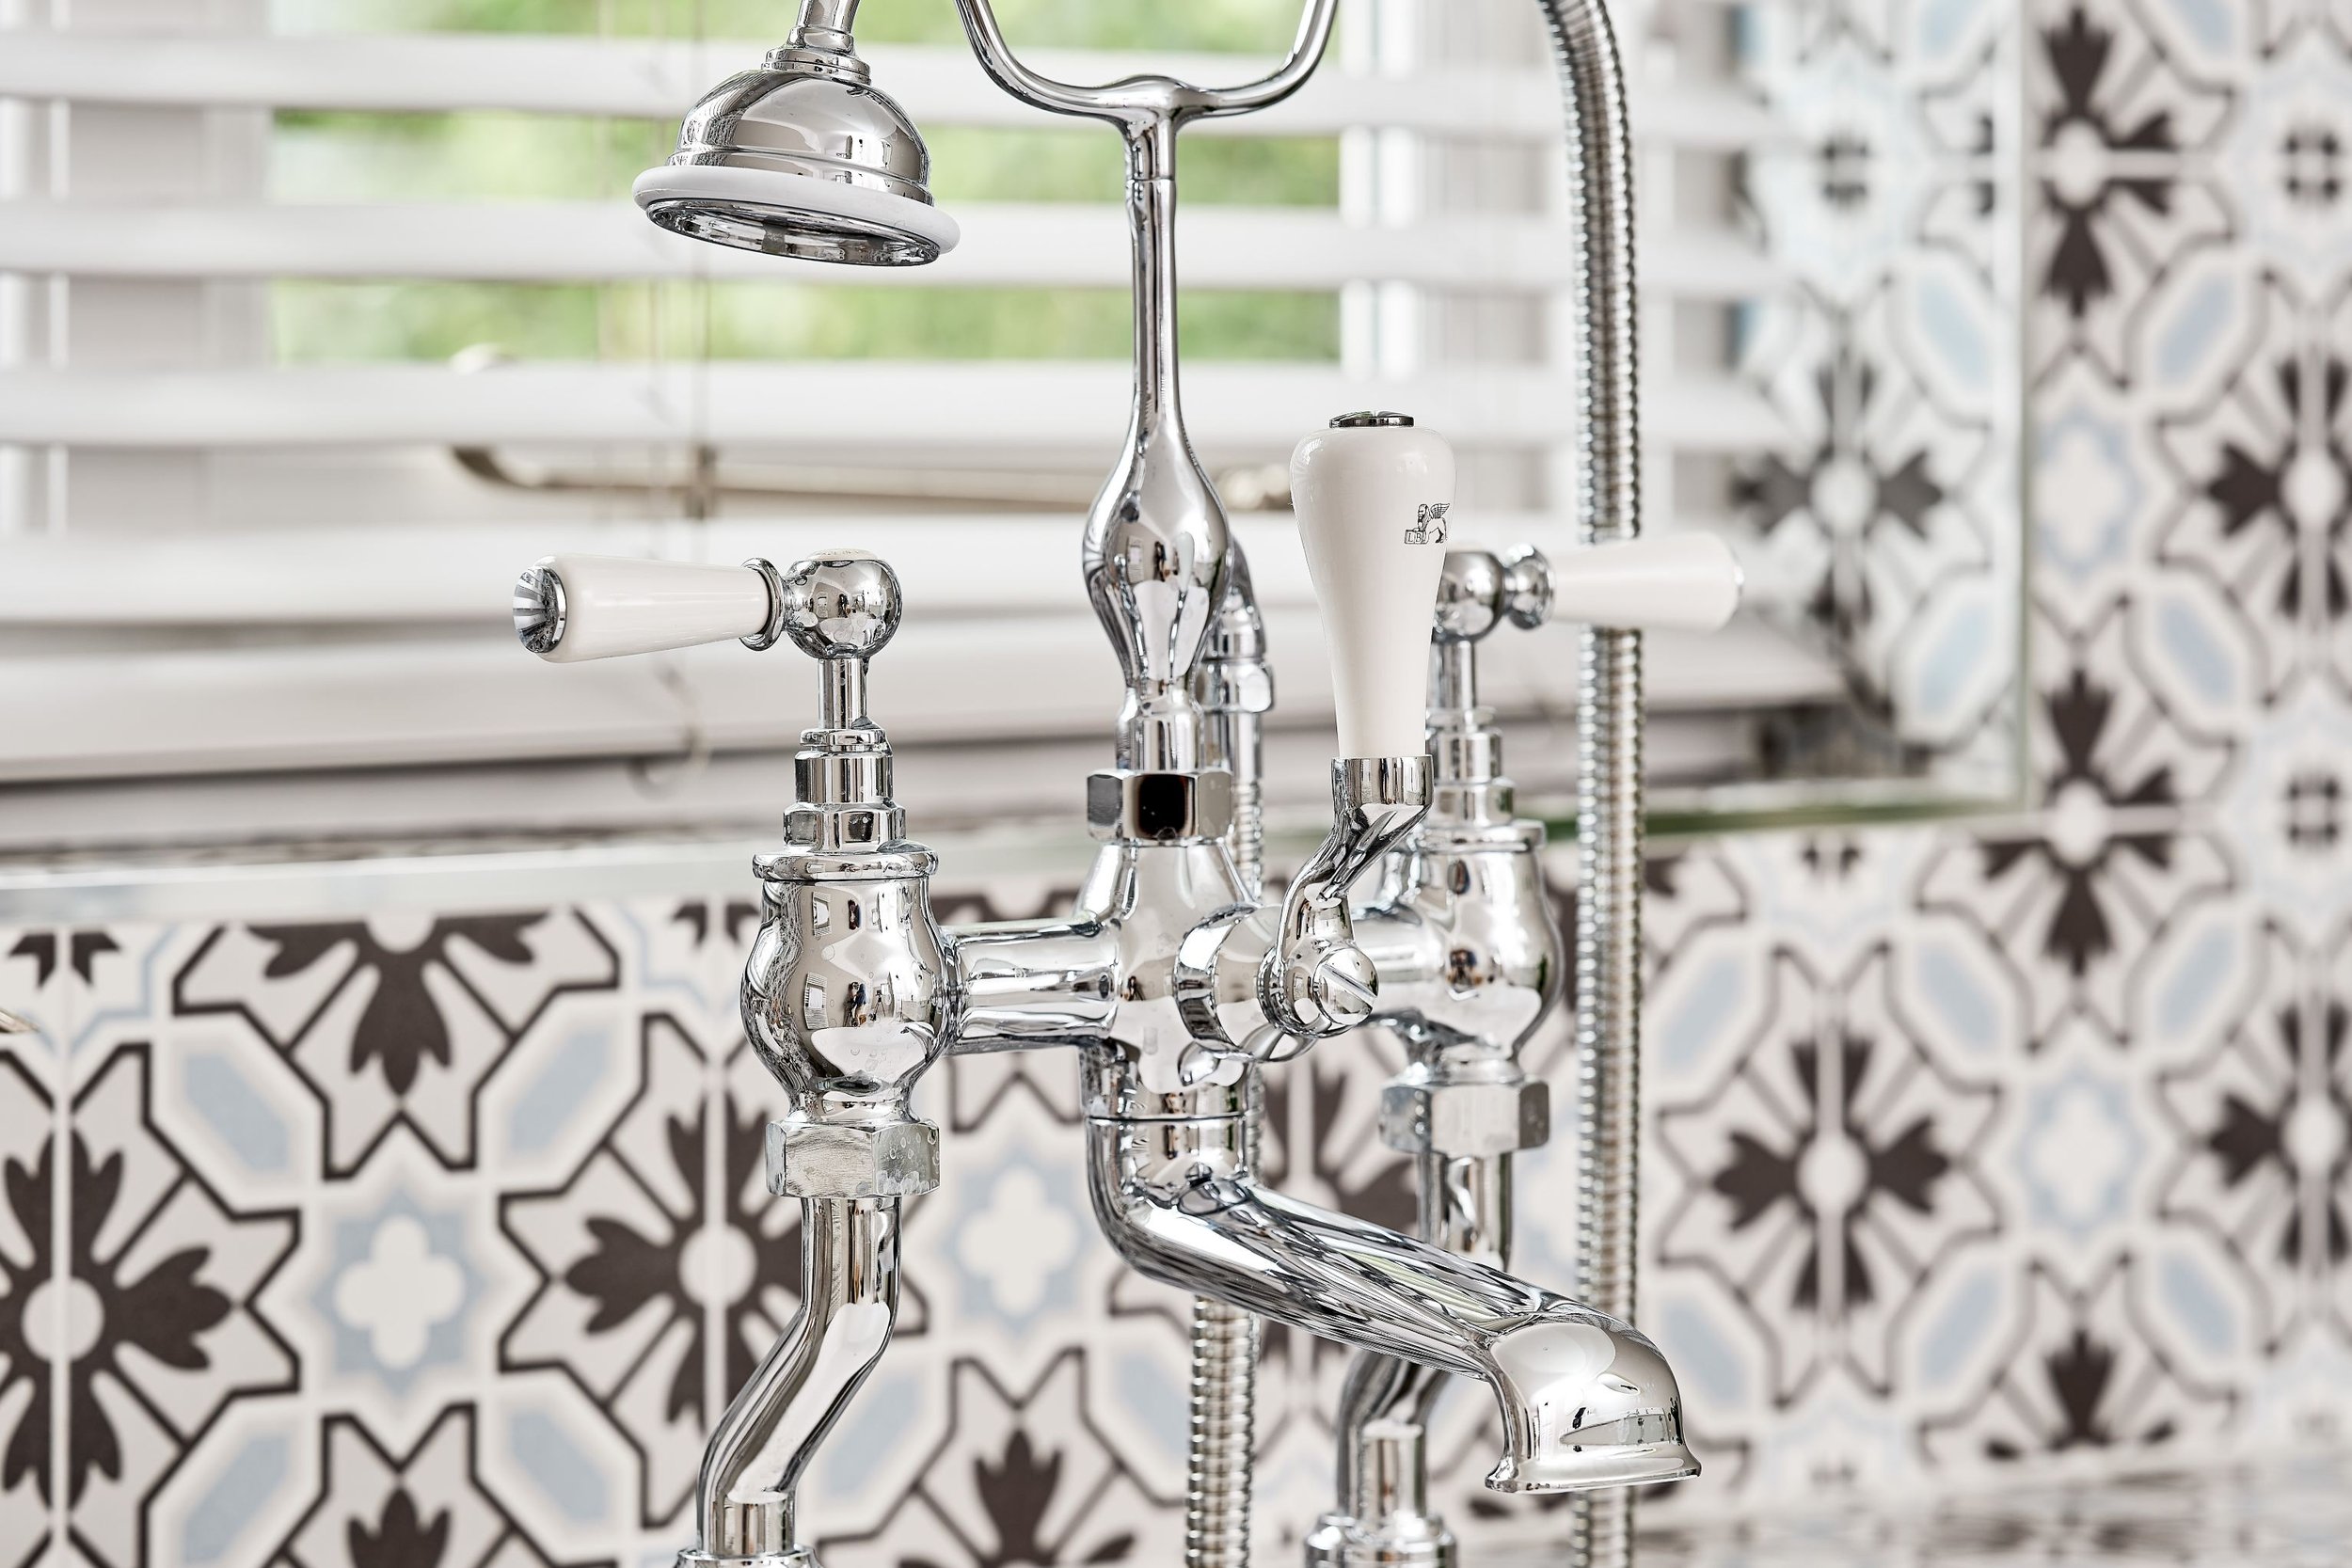 close-up-of-traditional-chrome-bath-mixer-and-shower.jpg